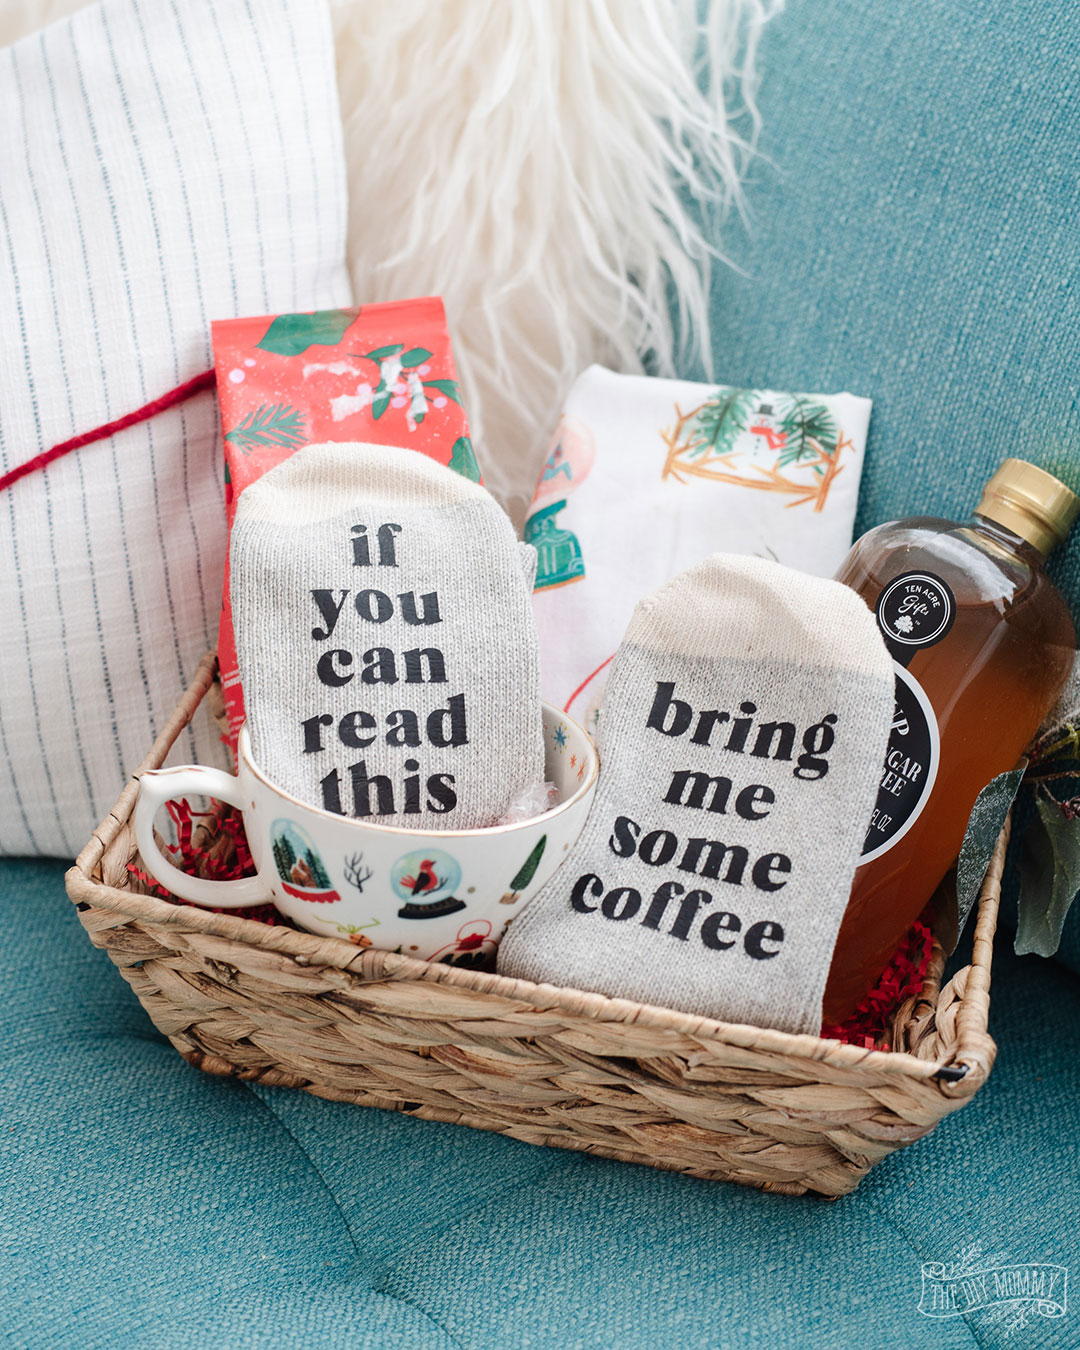 A wicker basket filled with personalized socks and other special gift items. A great DIY teacher Christmas gift idea.